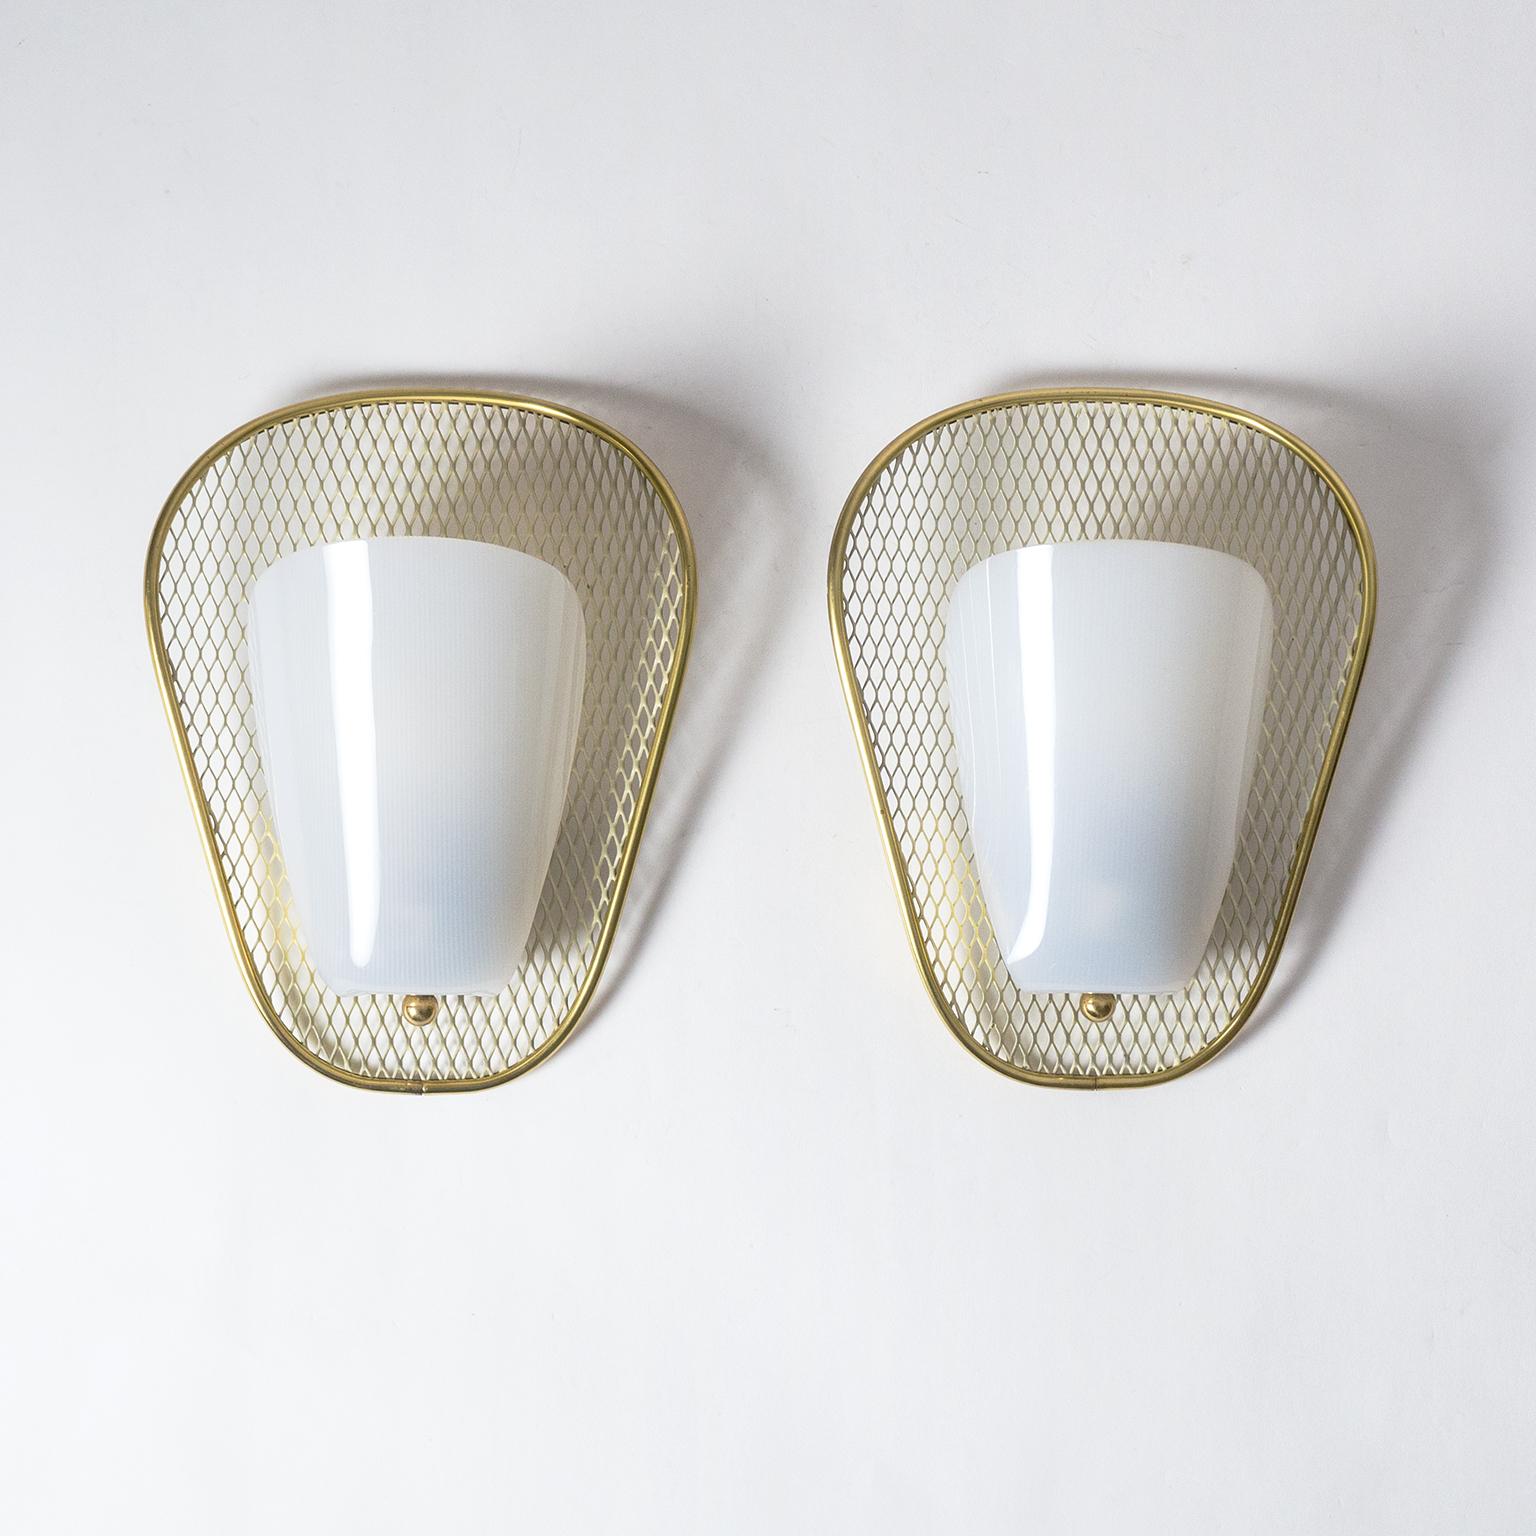 Classic midcentury sconces in the style of Jacques Biny. An organic shaped and curved backplate made of an expanded metal mesh, lacquered in ivory, with a brass rim. The diffuser is opaque acrylic with a ribbed surface on the inside. Very good